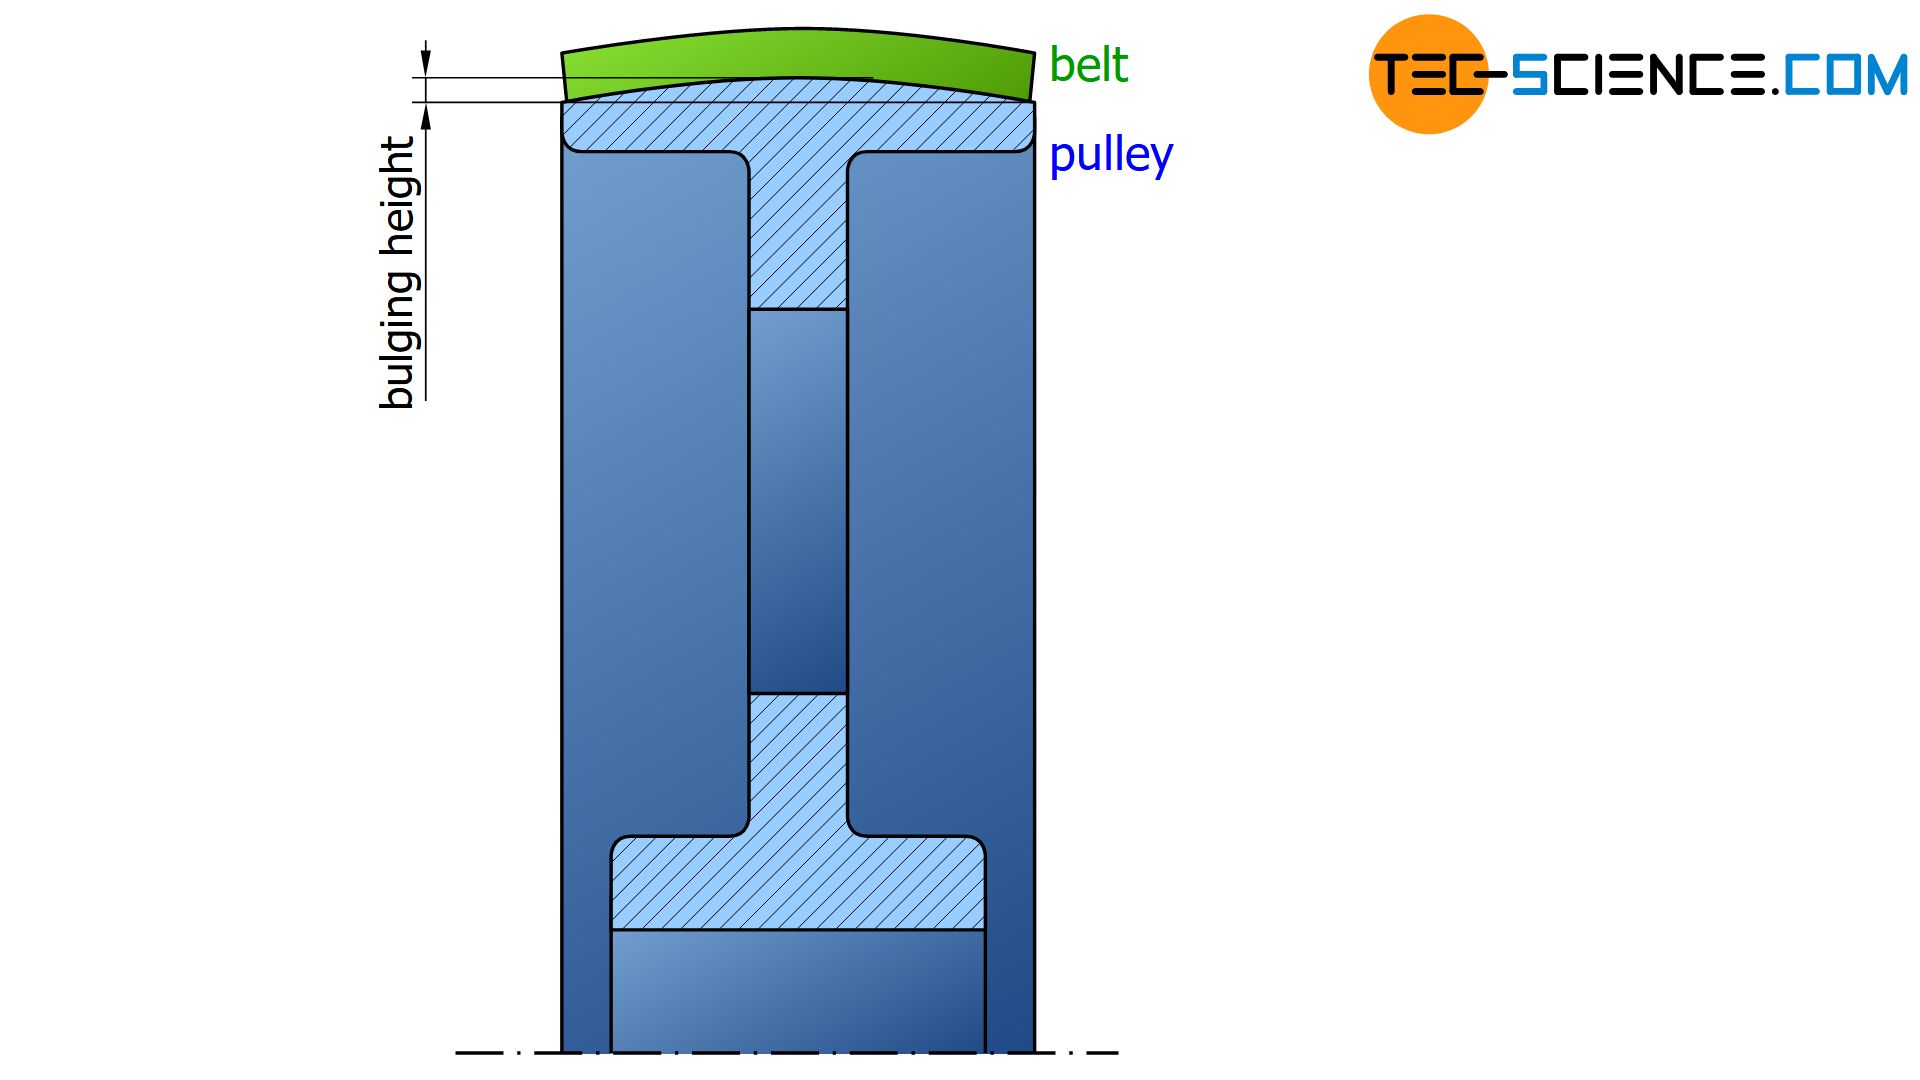 Types of belts for belt drives - tec-science